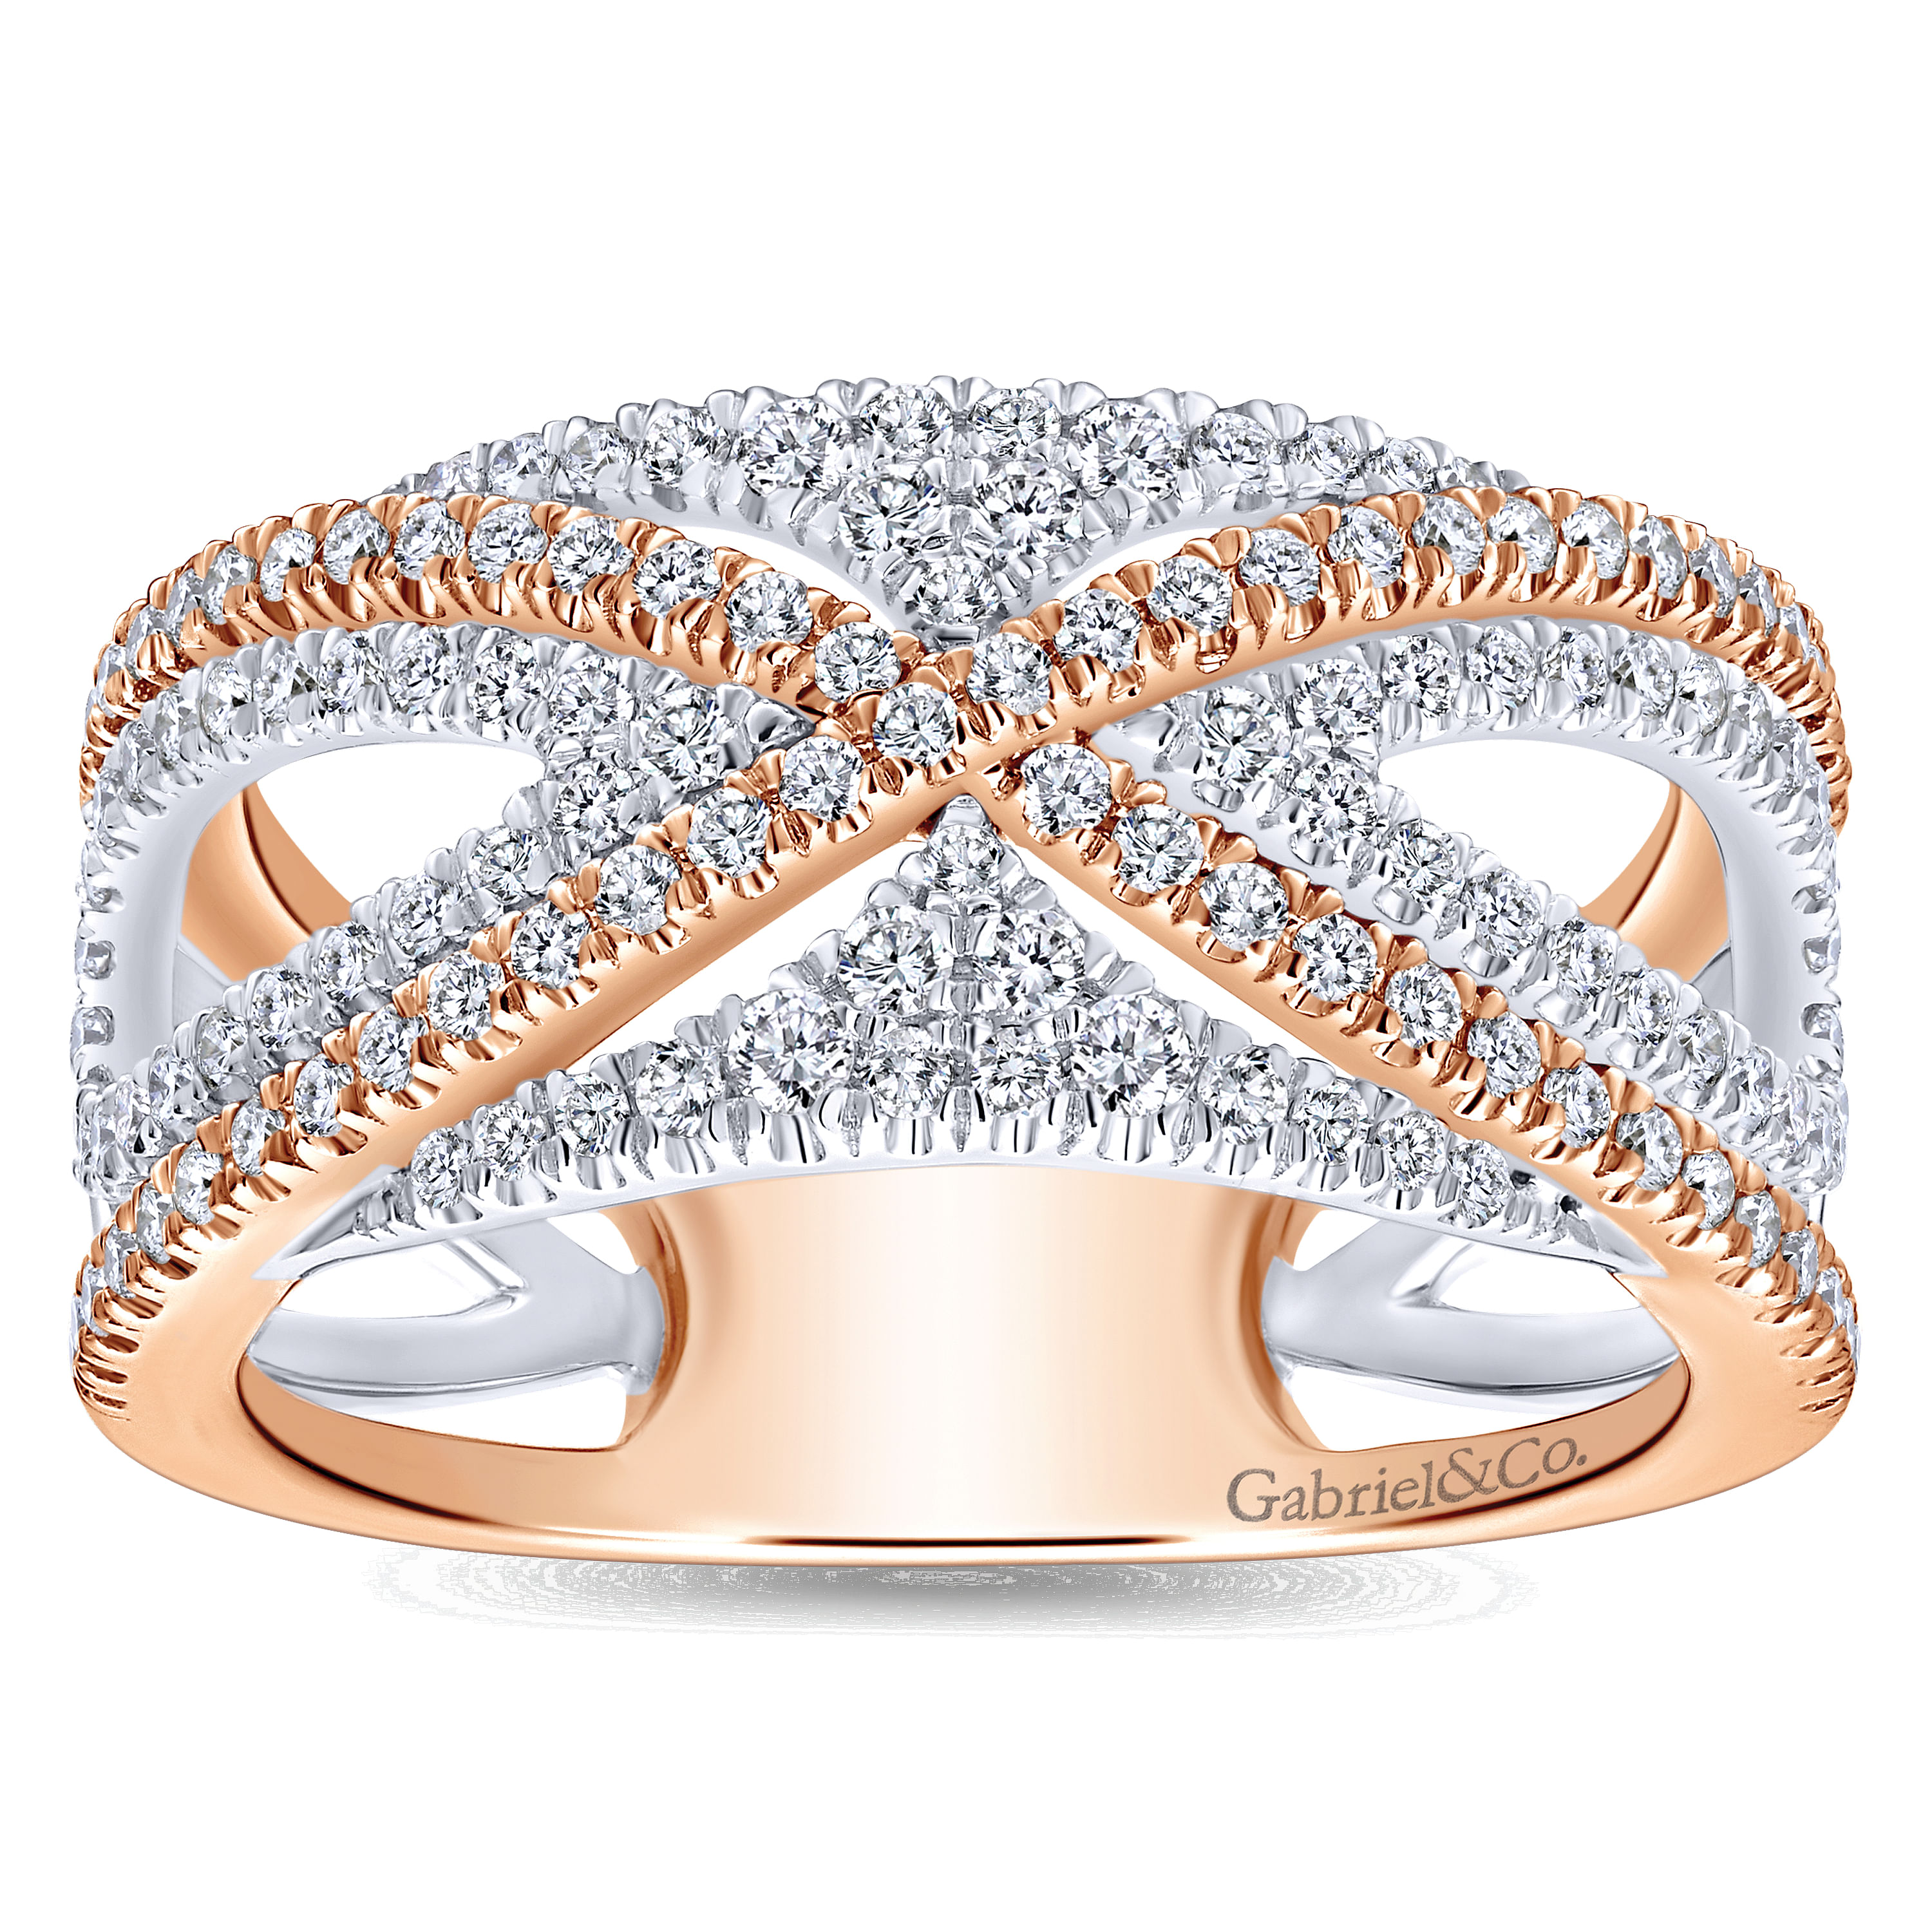 Wide 14K White and Rose Gold French Pavé Set Diamond Anniversary Band